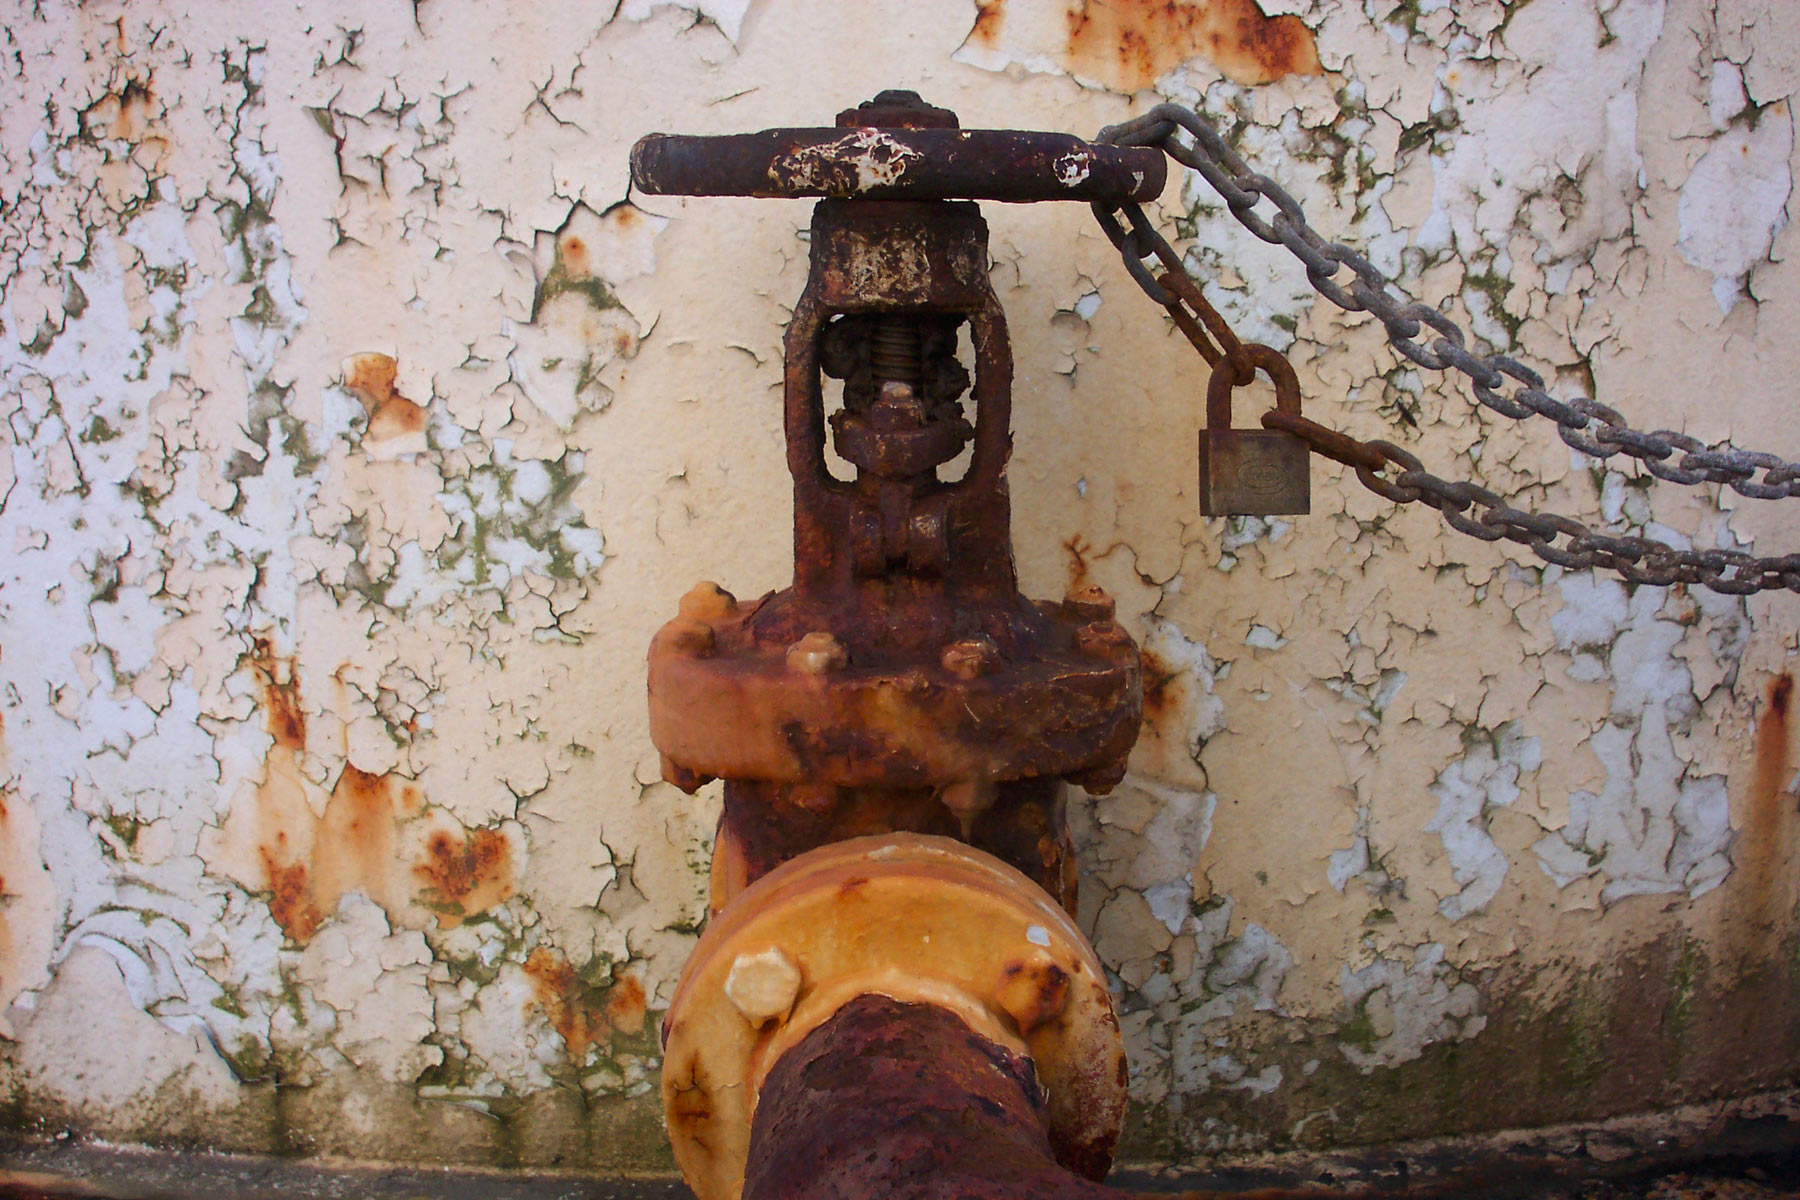 Rusted steel tap photo